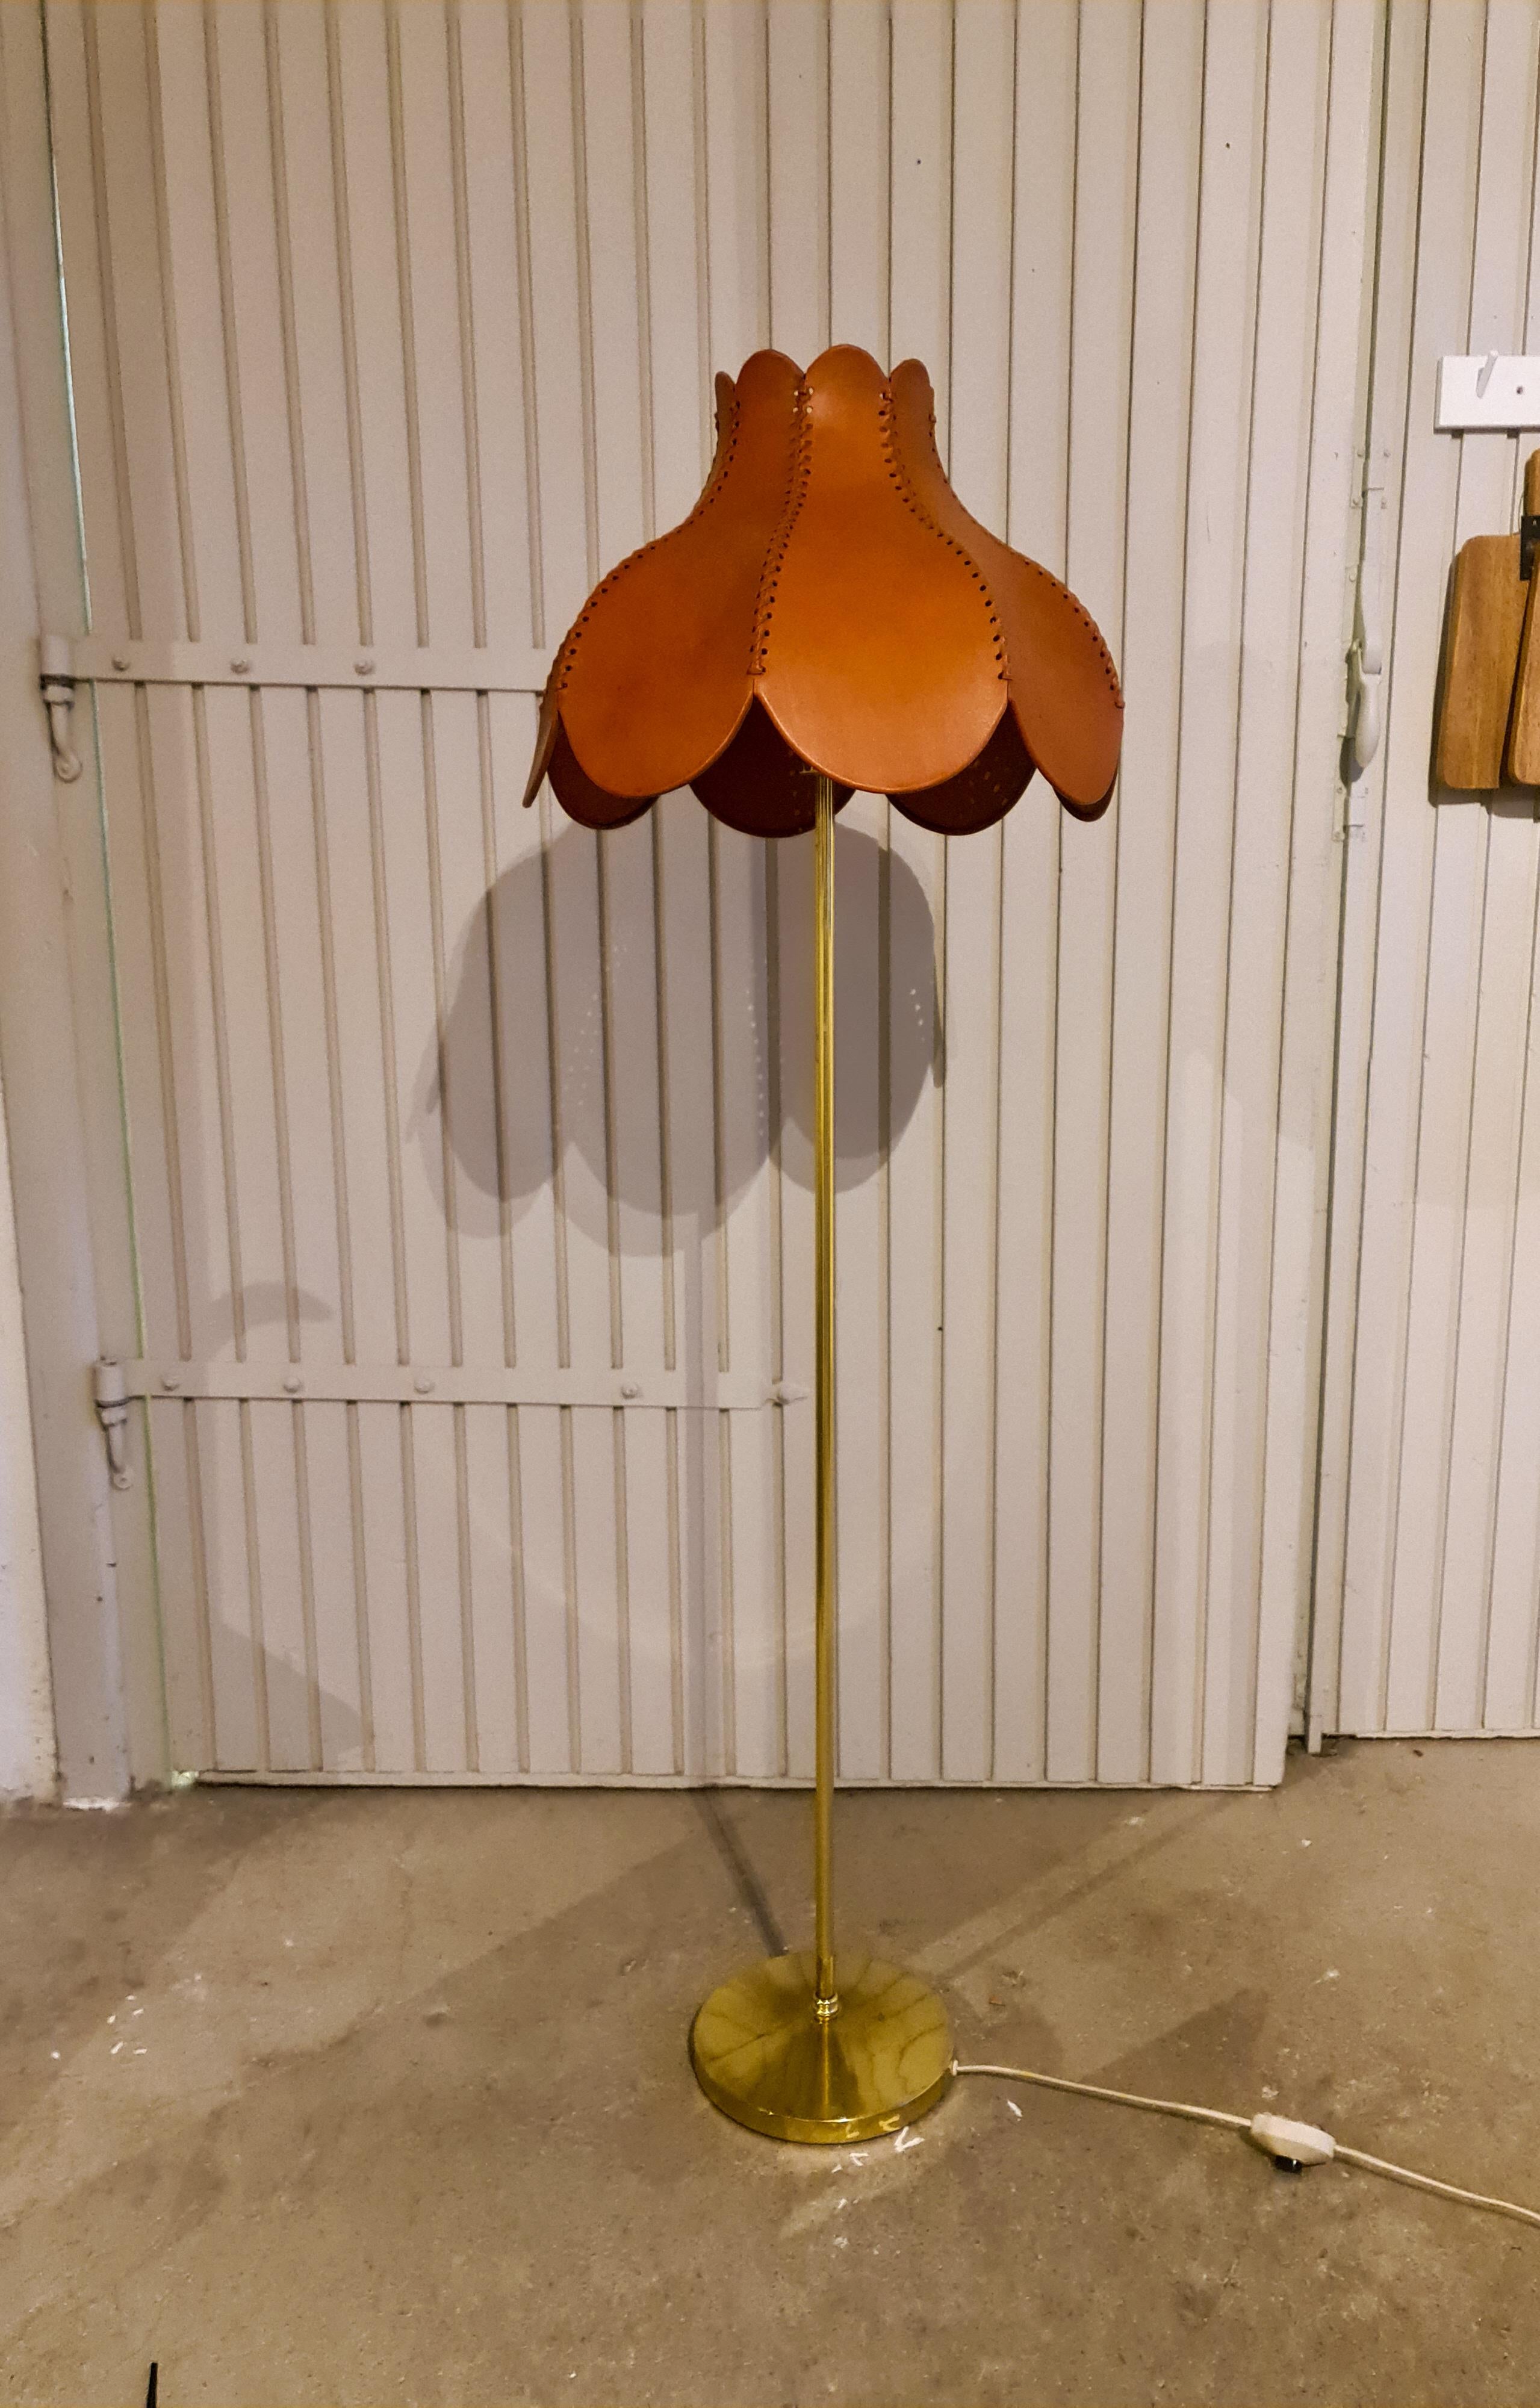 Wonderful floor lamp produced in Sweden in the 1970s. Designed by Hans-Agne Jakobsson. This model has a solid brass stand with iron base and the lamp shade is made of leather with handcrafted stitches.

Good working condition, with some vintage